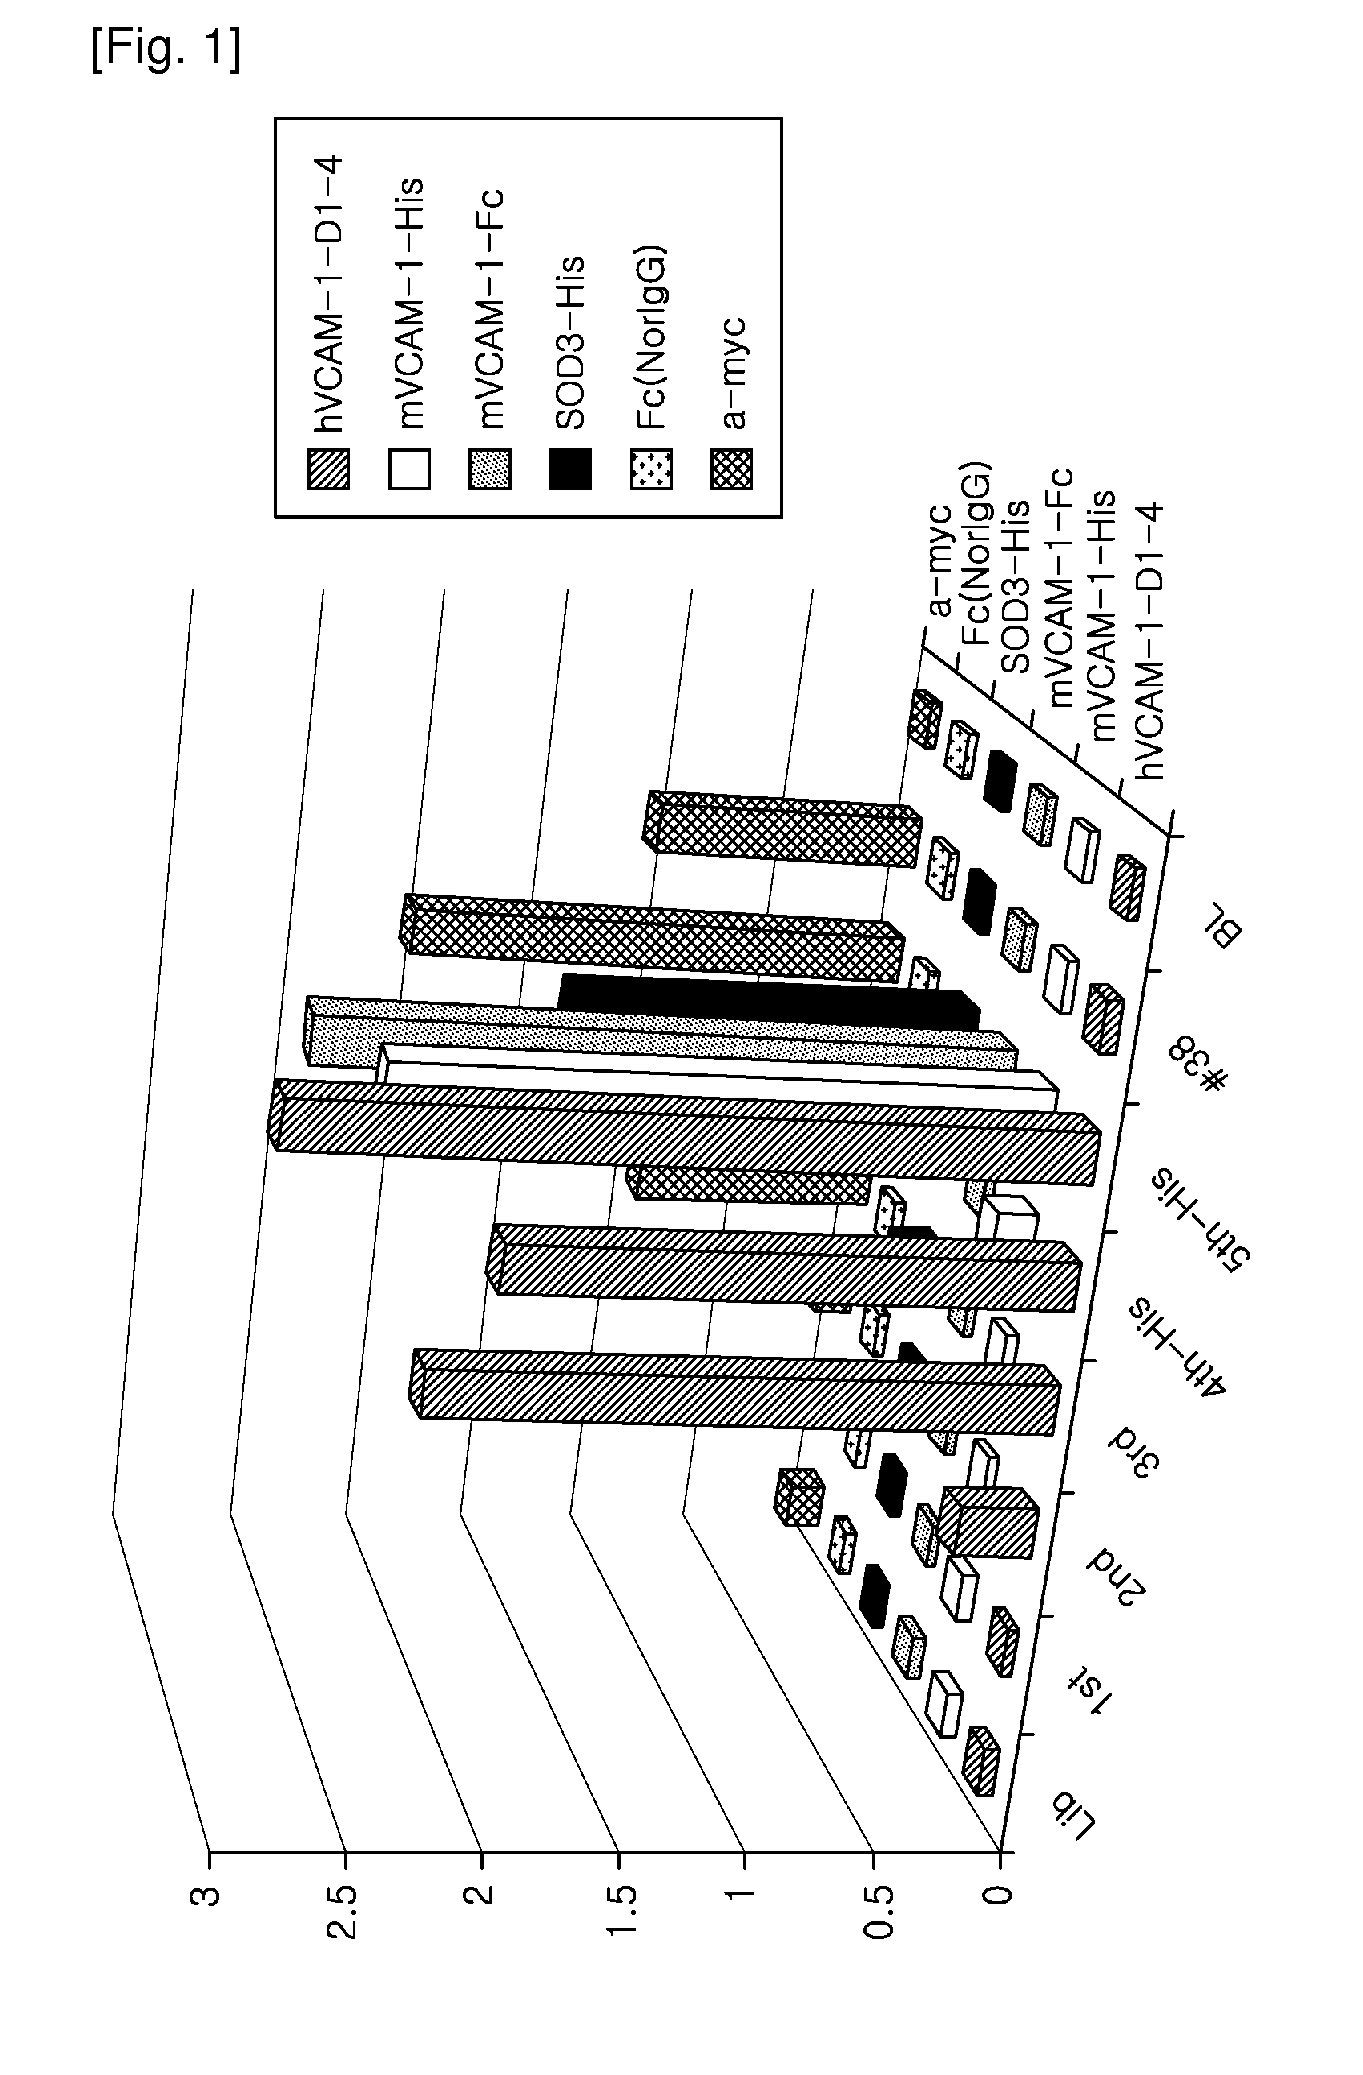 Human monoclonal antibody that specifically binds to vcam-1 and a composition for treating an inflammatory disease or a cancer comprising the same